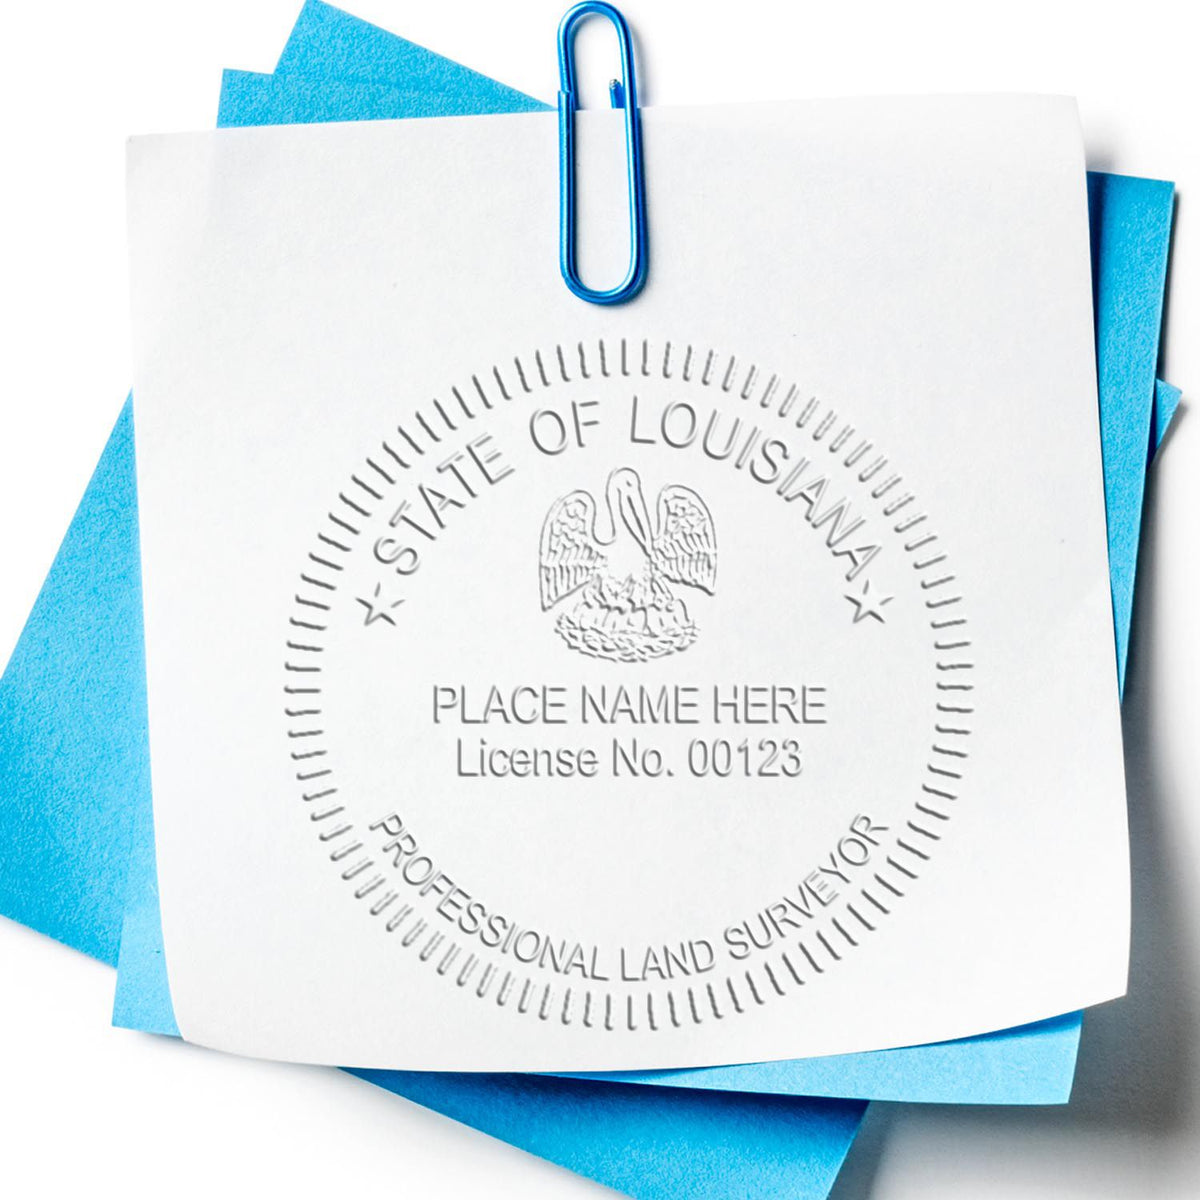 A stamped imprint of the Gift Louisiana Land Surveyor Seal in this stylish lifestyle photo, setting the tone for a unique and personalized product.